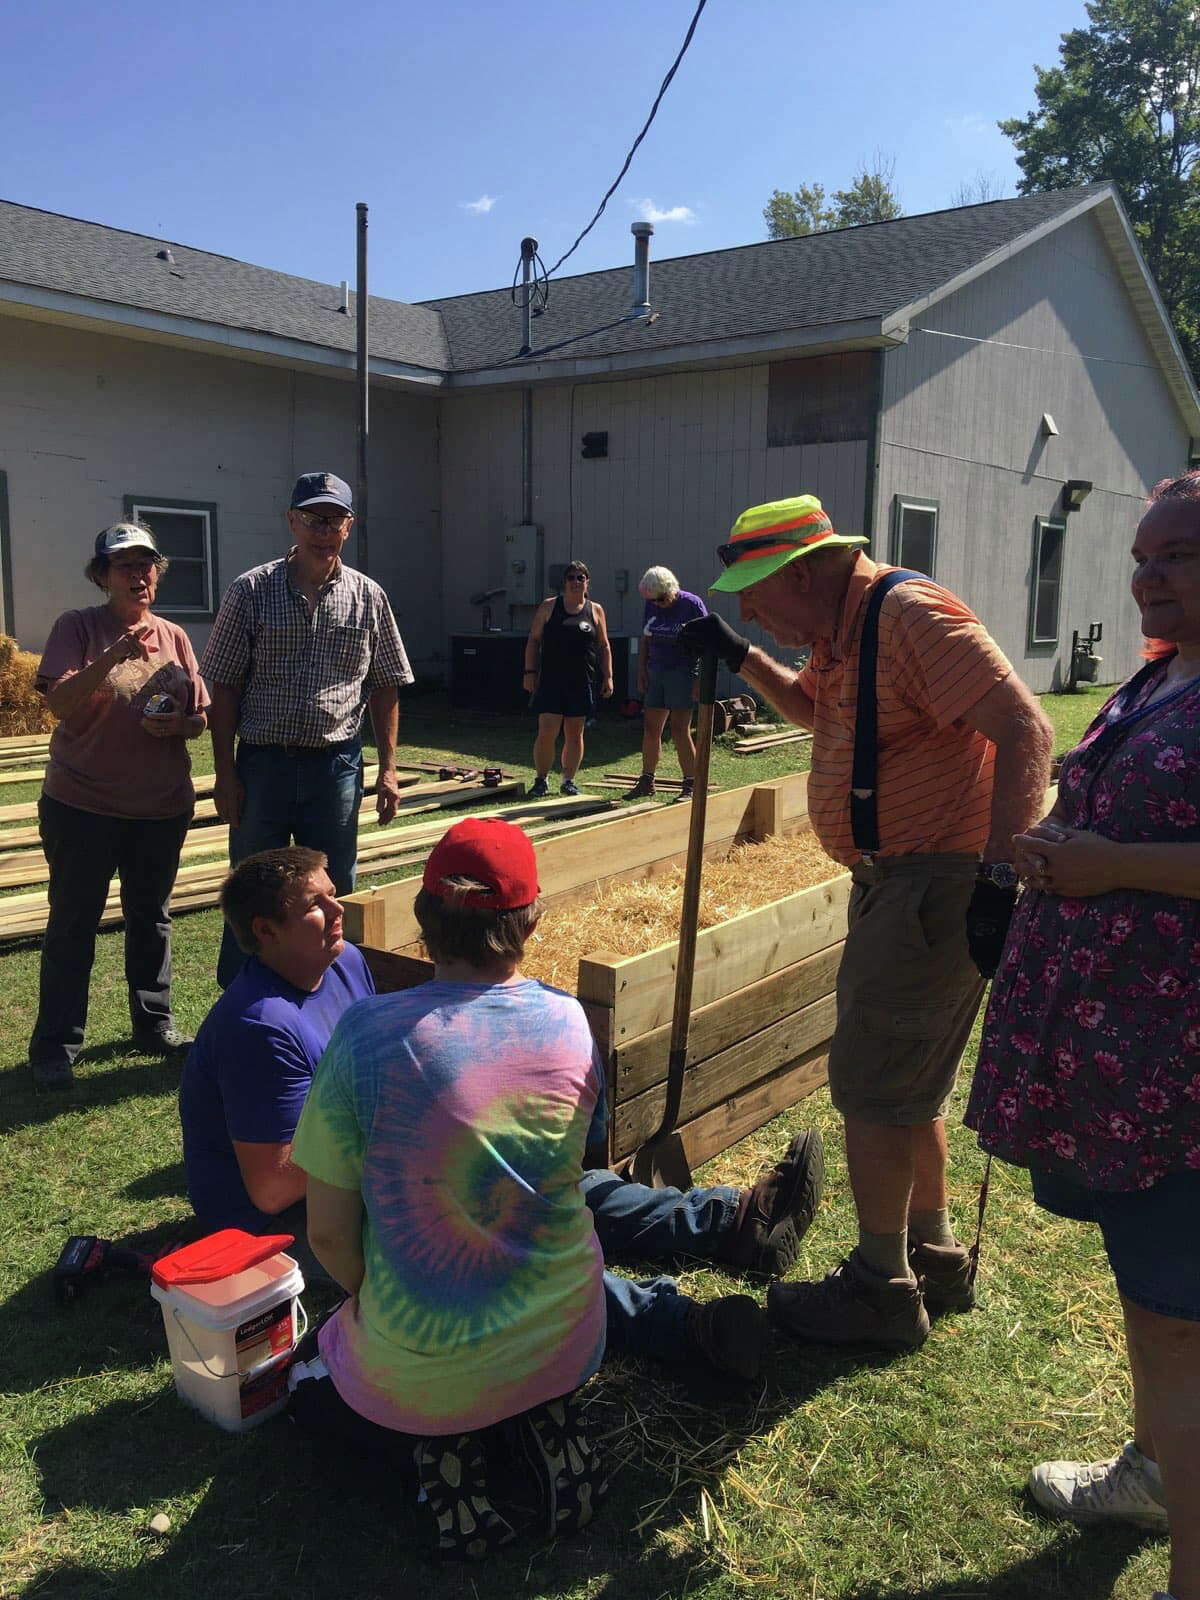 The Good Time Bowlers not only meet for recreation and fun, but also do service outreach, such as a community garden project. 